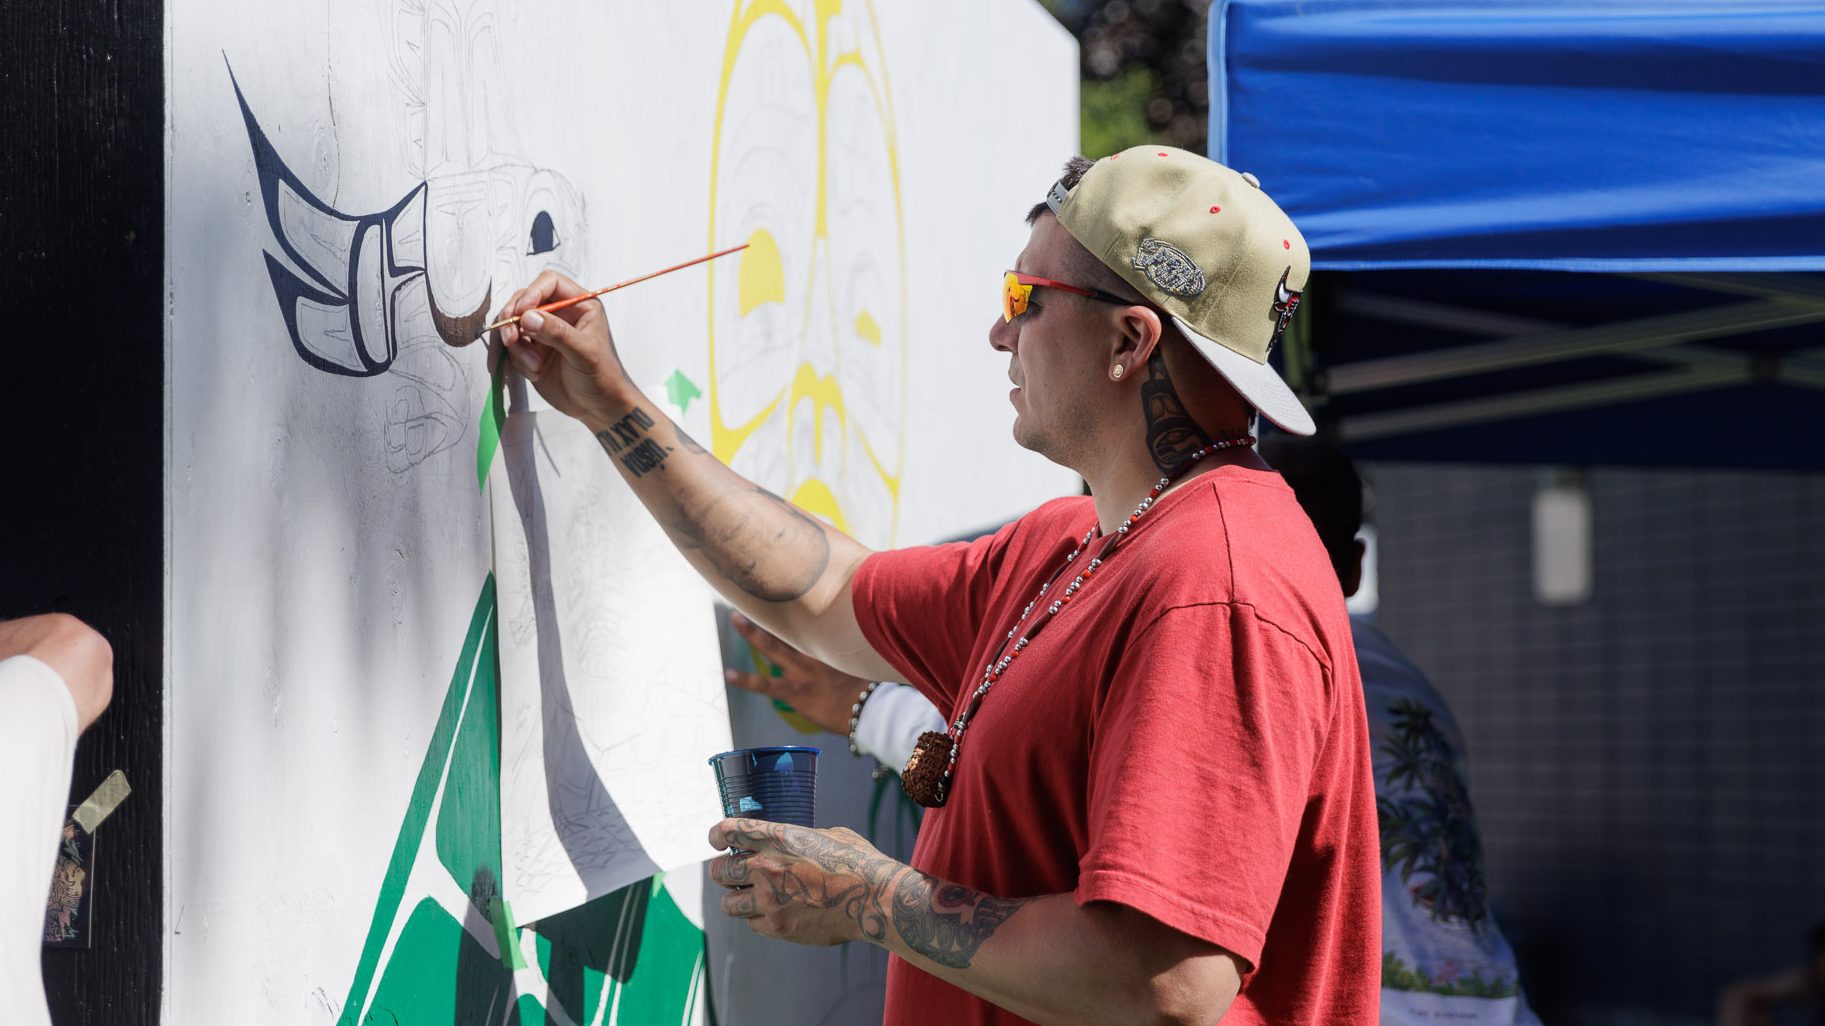 https://www.downtownsquamish.com/wp-content/uploads/2022/09/220625_Squamish-Mural-Festival-Day-3_CTP_0668-e1683819693591.jpg